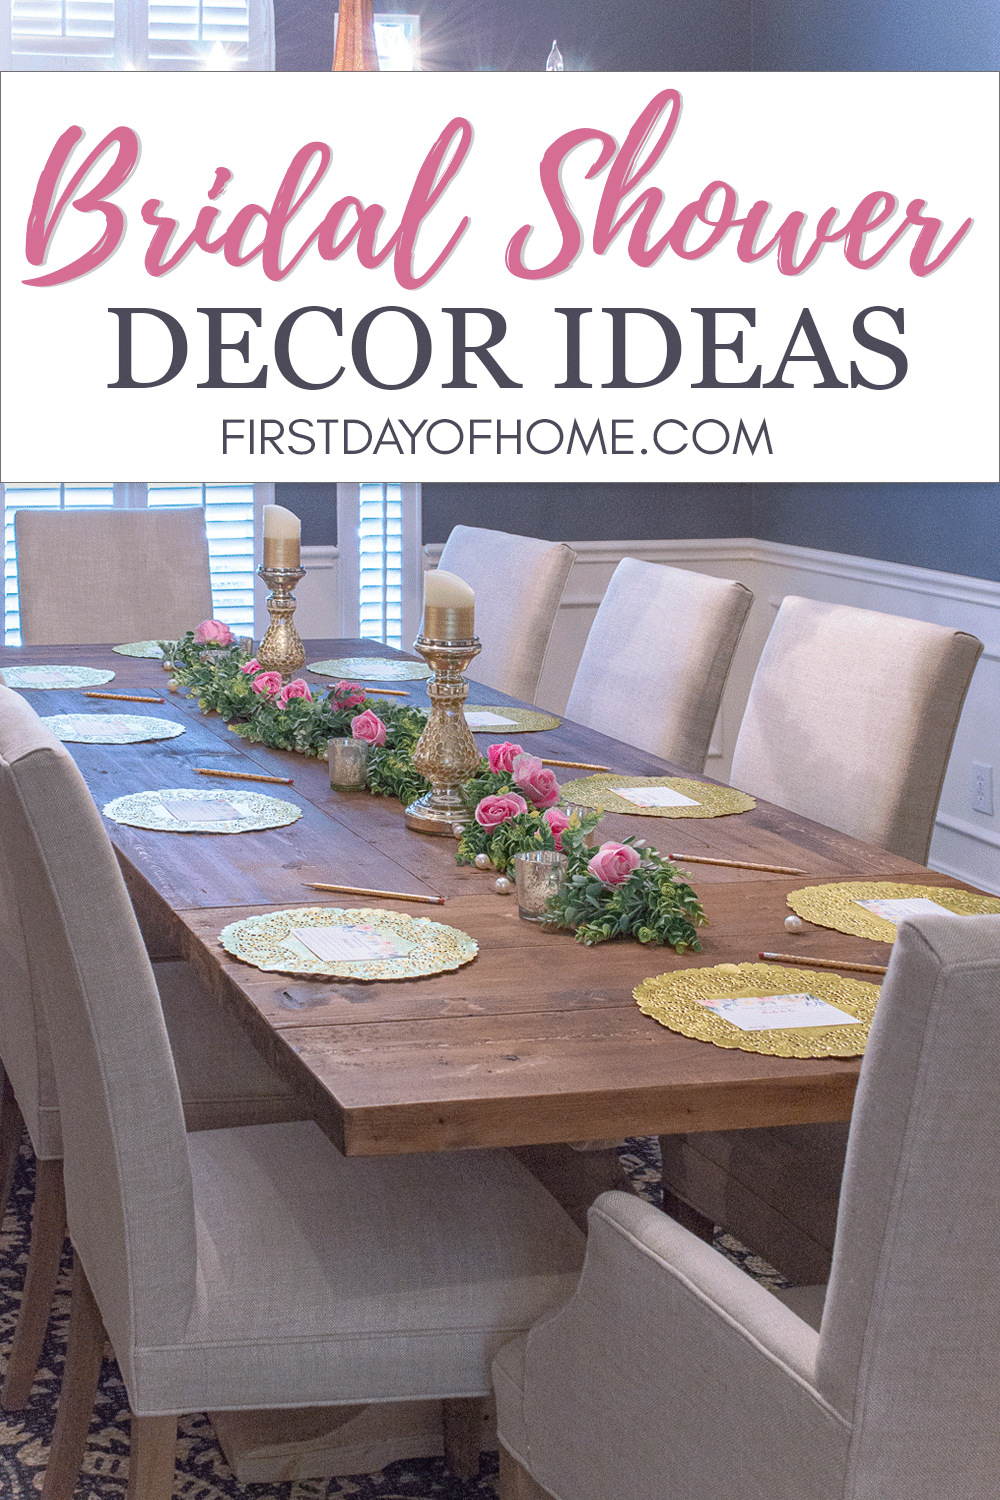 Bridal shower table decorations and DIY decorating ideas - photo of formal dining room tablescape for bridal shower